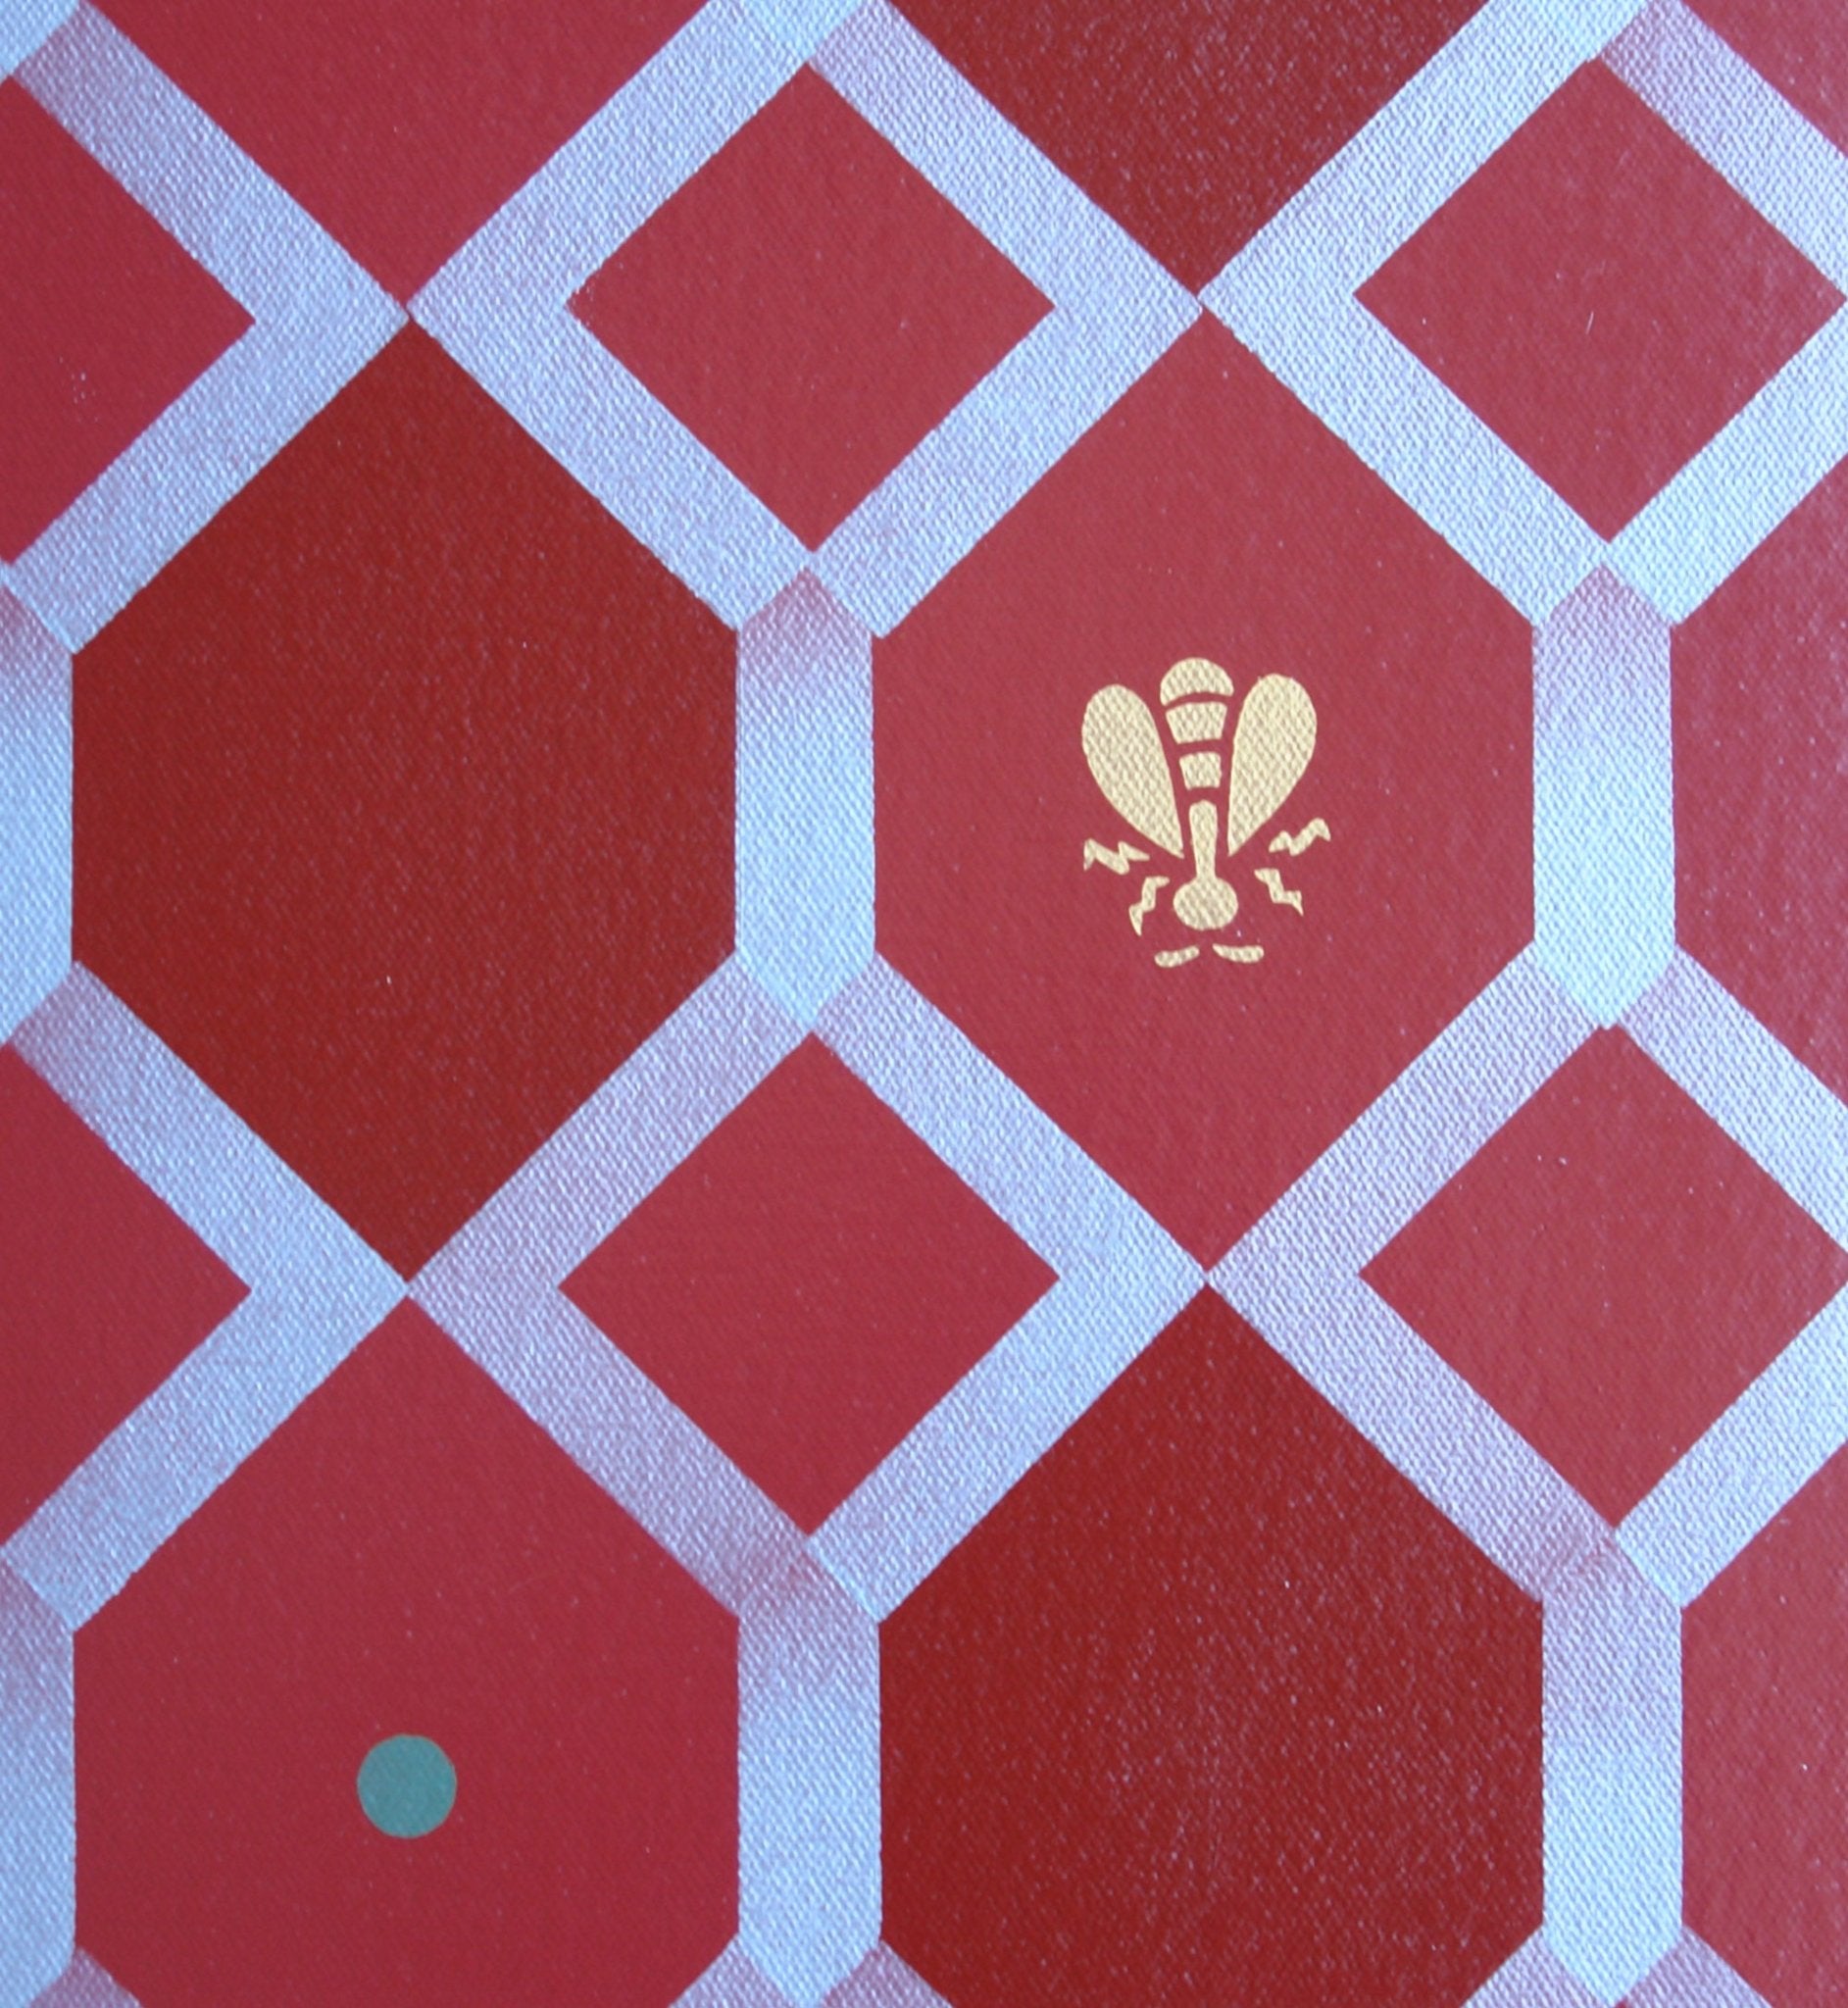 A close up of the center motifs for Honeycomb Floorcloth #3.